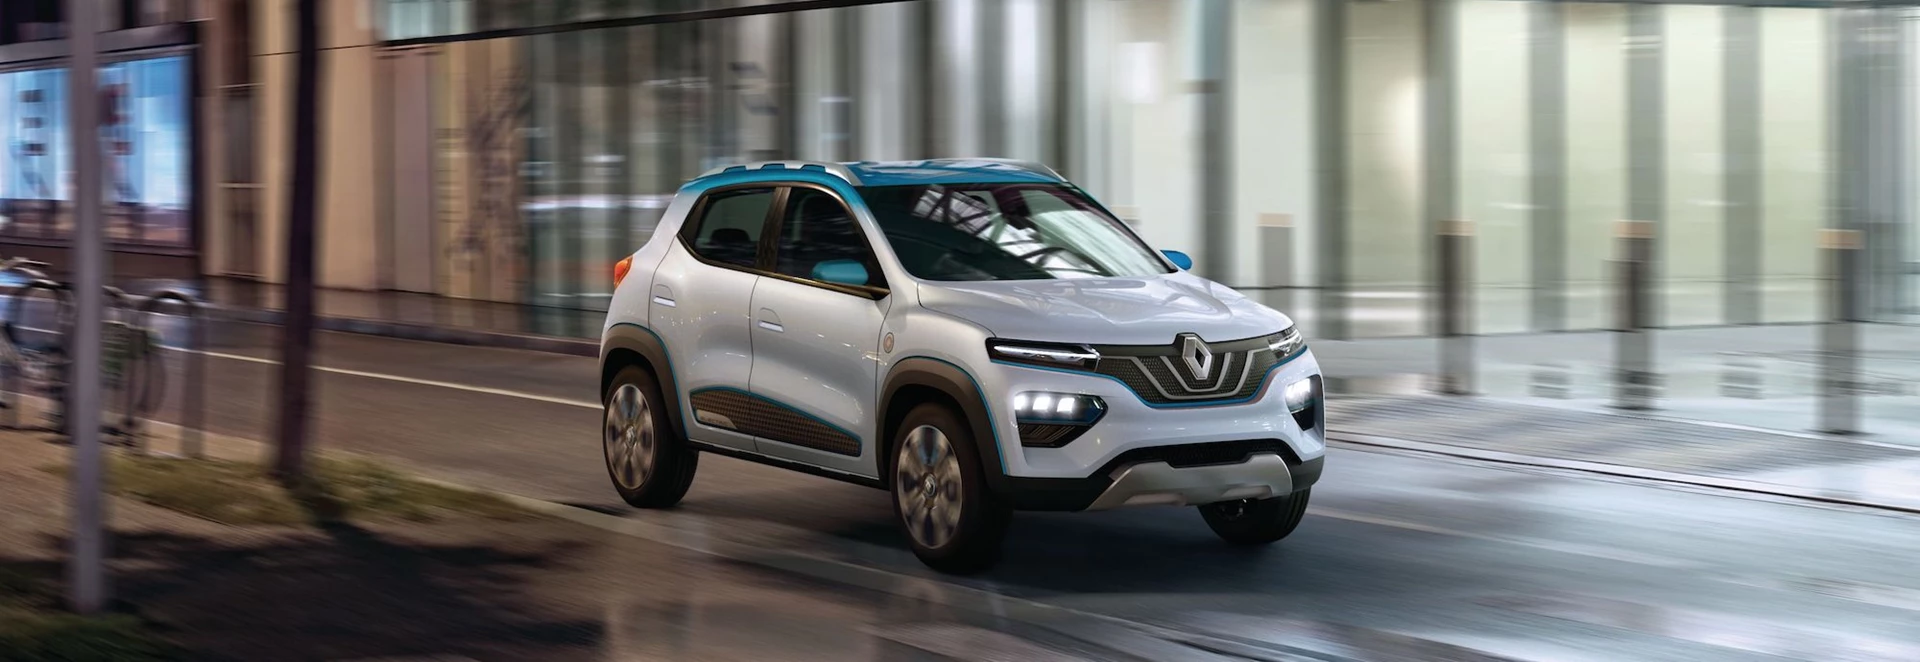 Renault launches K-ZE electric crossover